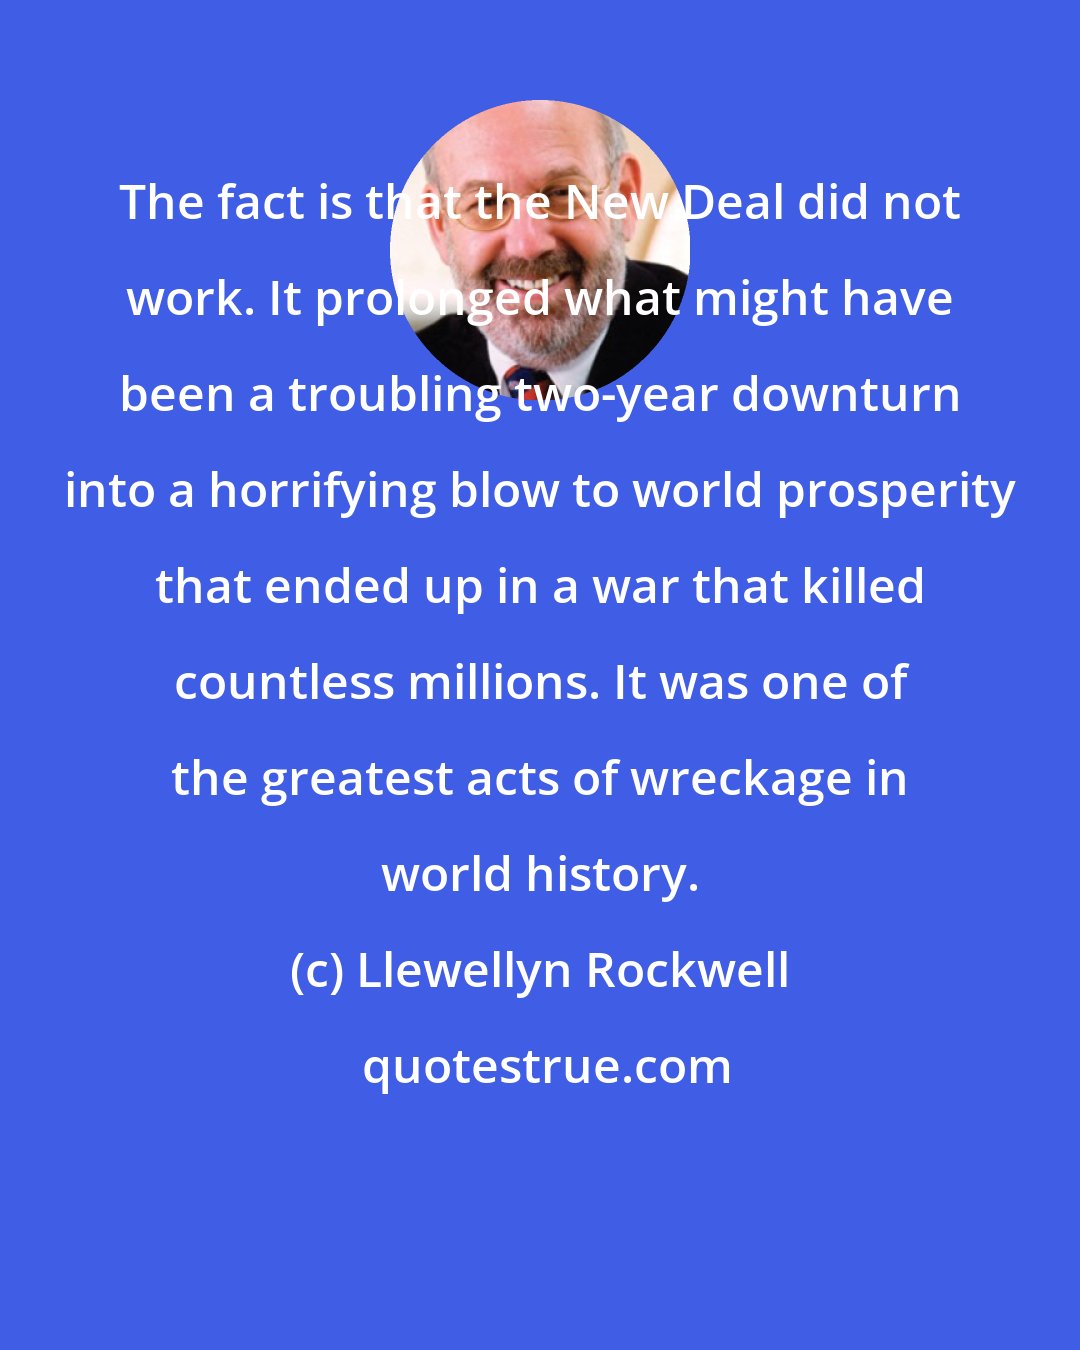 Llewellyn Rockwell: The fact is that the New Deal did not work. It prolonged what might have been a troubling two-year downturn into a horrifying blow to world prosperity that ended up in a war that killed countless millions. It was one of the greatest acts of wreckage in world history.